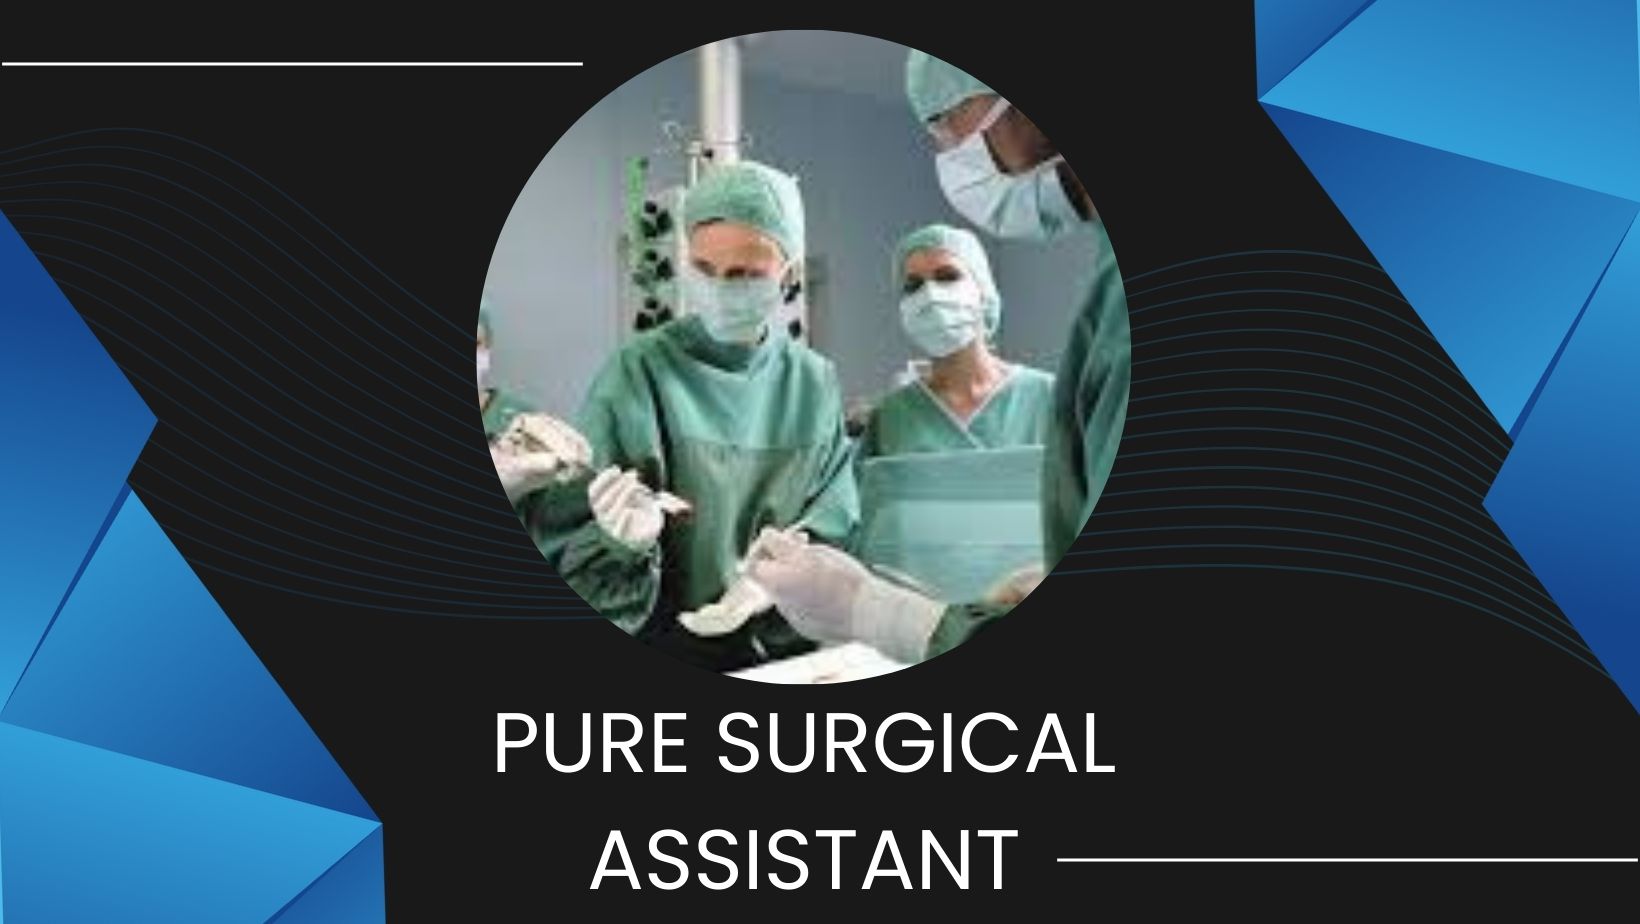 PURE SURGICAL ASSISTANT